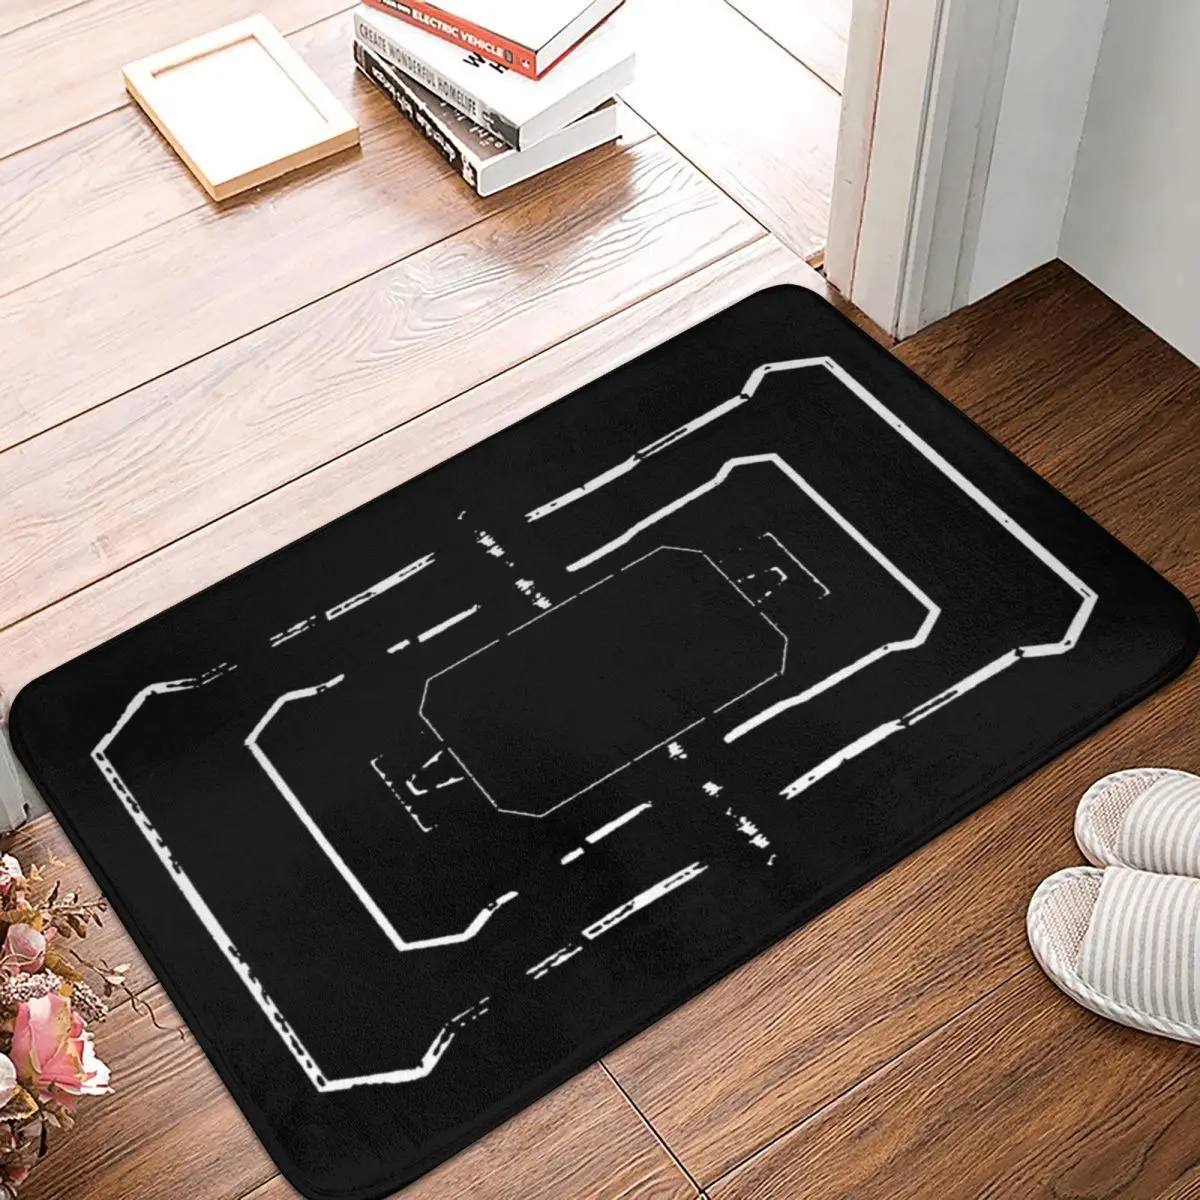 

Frost Trap Welcome Mat Doormat Rug Carpet Mat Footpad Polyester Non-slip Antiwear Entrance Kitchen Bedroom Balcony Toilet